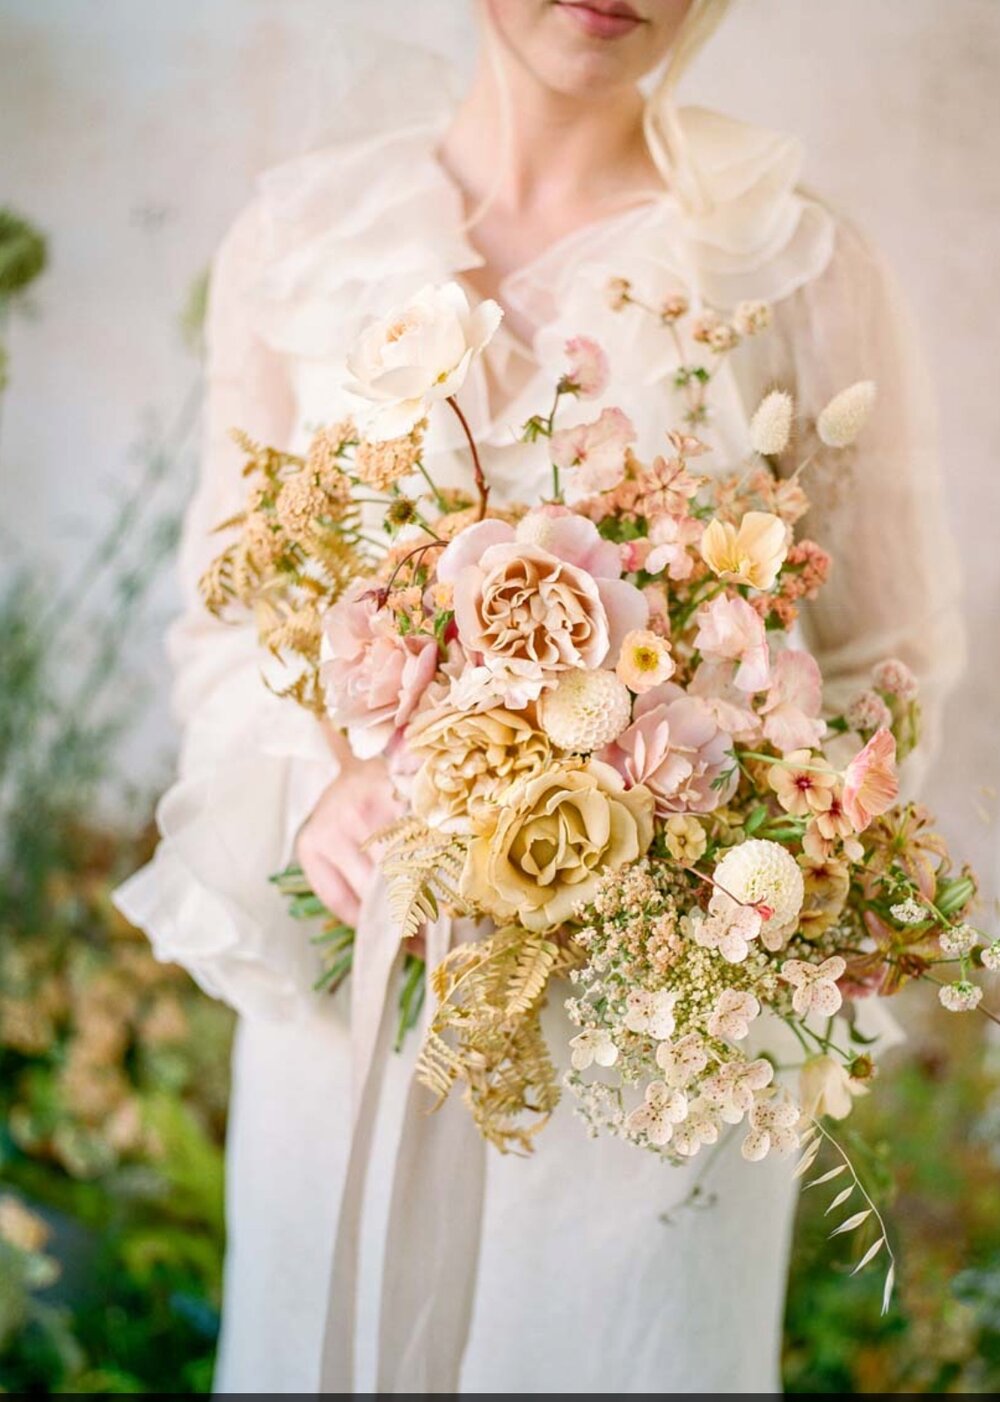 Florals by Gabriela Salazar/ Image by Christina McNeill Photography